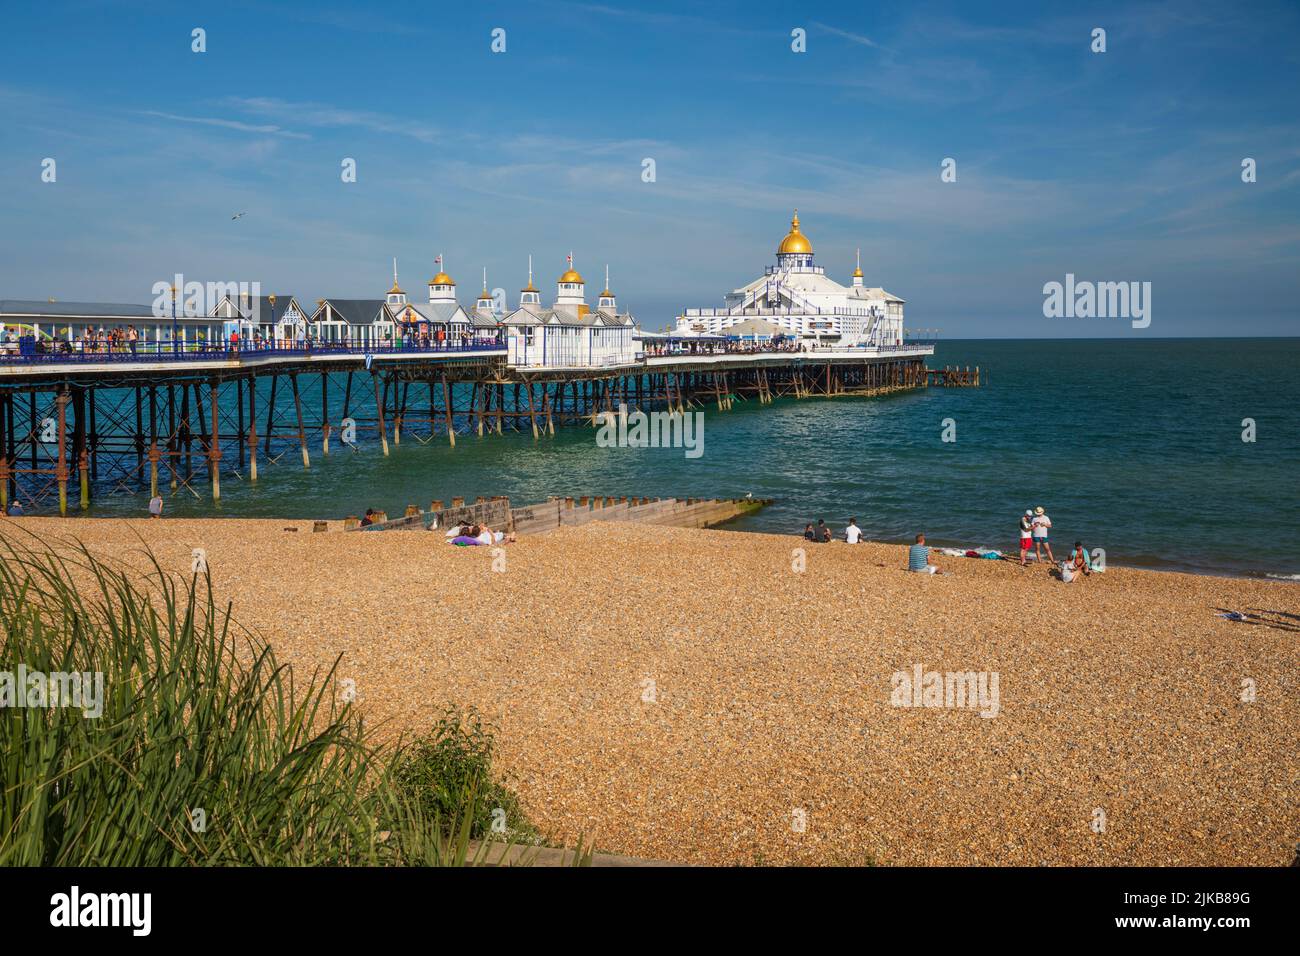 View over pebble beach to Eastbourne Pier, Eastbourne, East Sussex, England, United Kingdom, Europe Stock Photo